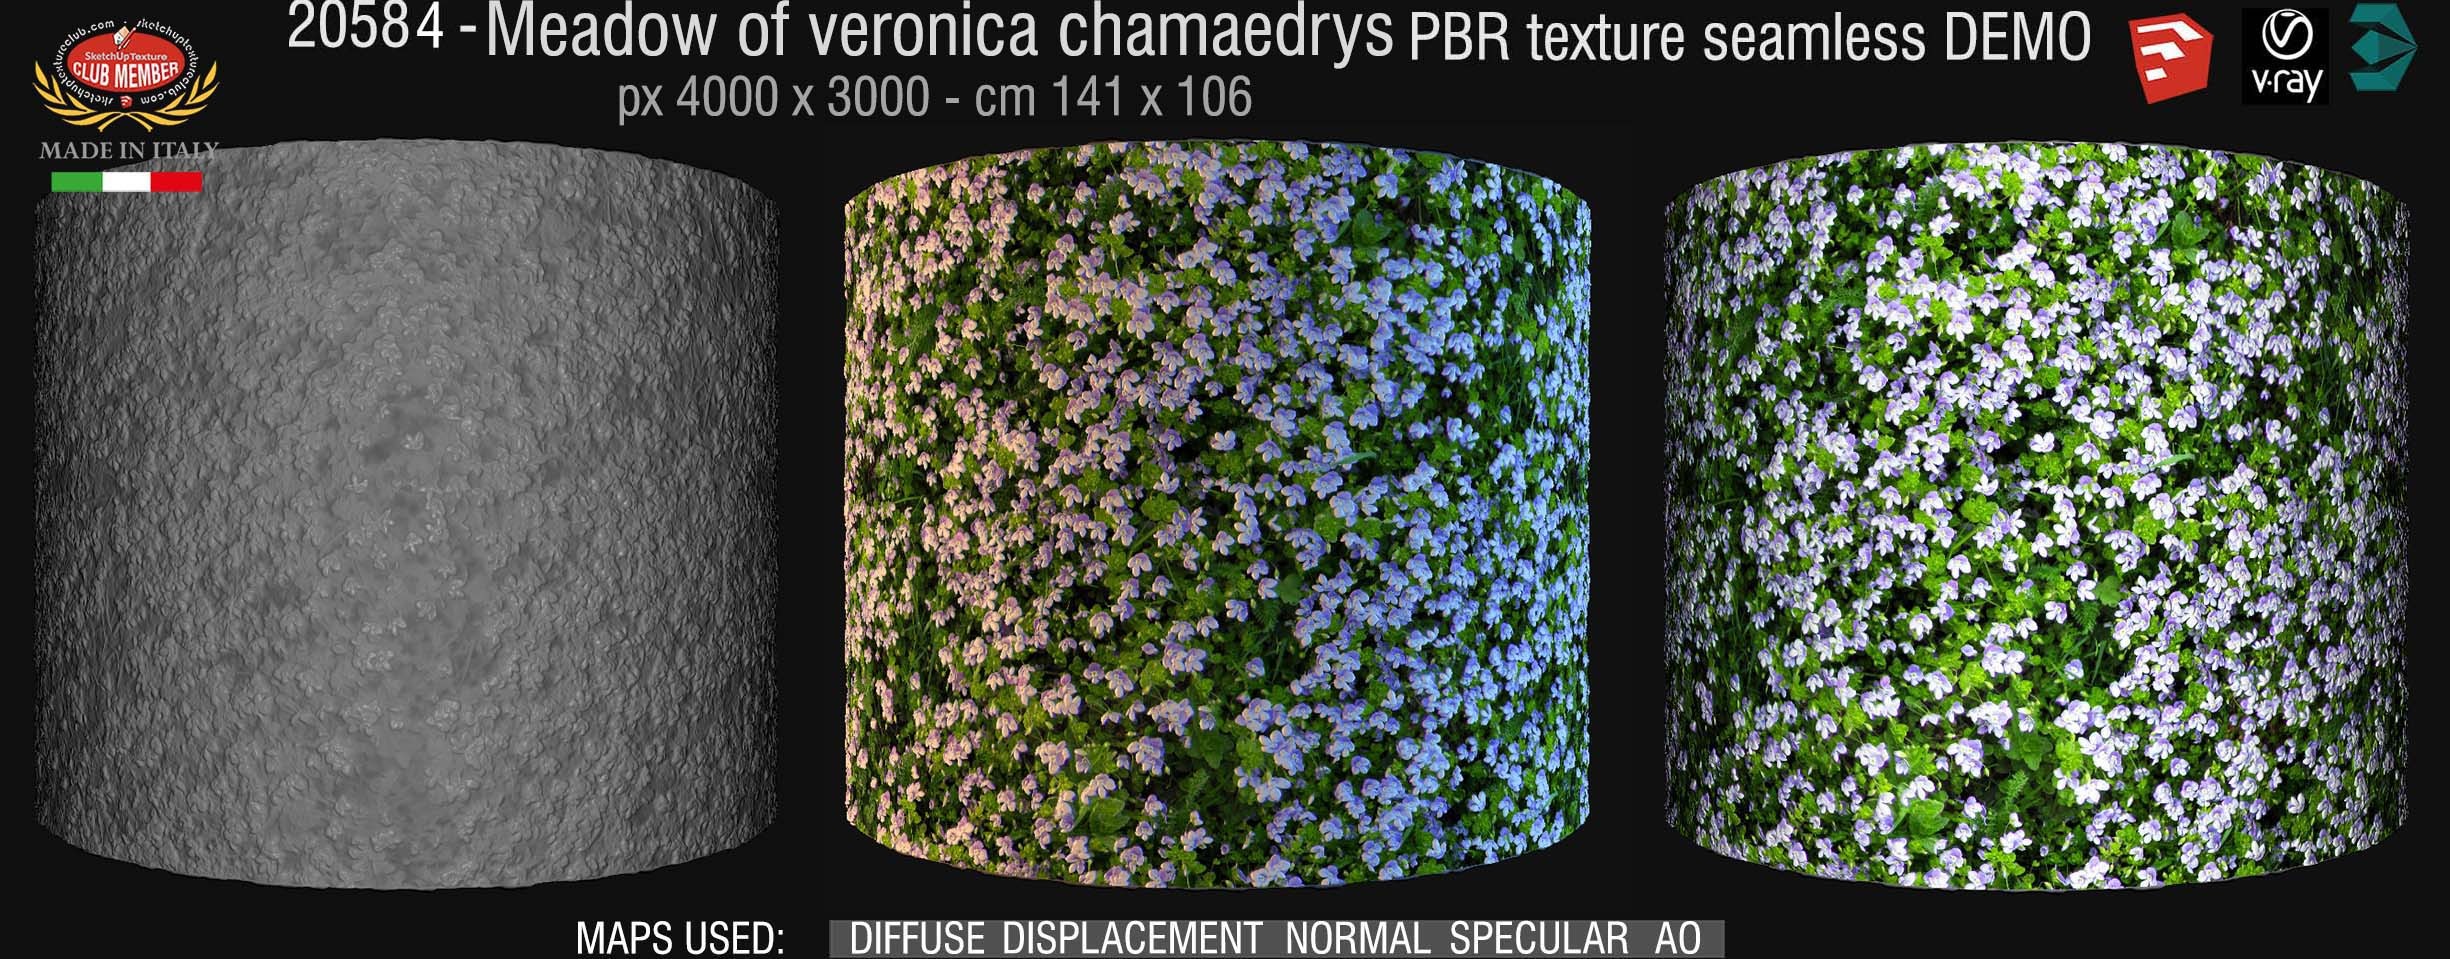 20584 meadow of Veronica chamaedrys PBR texture seamless demo